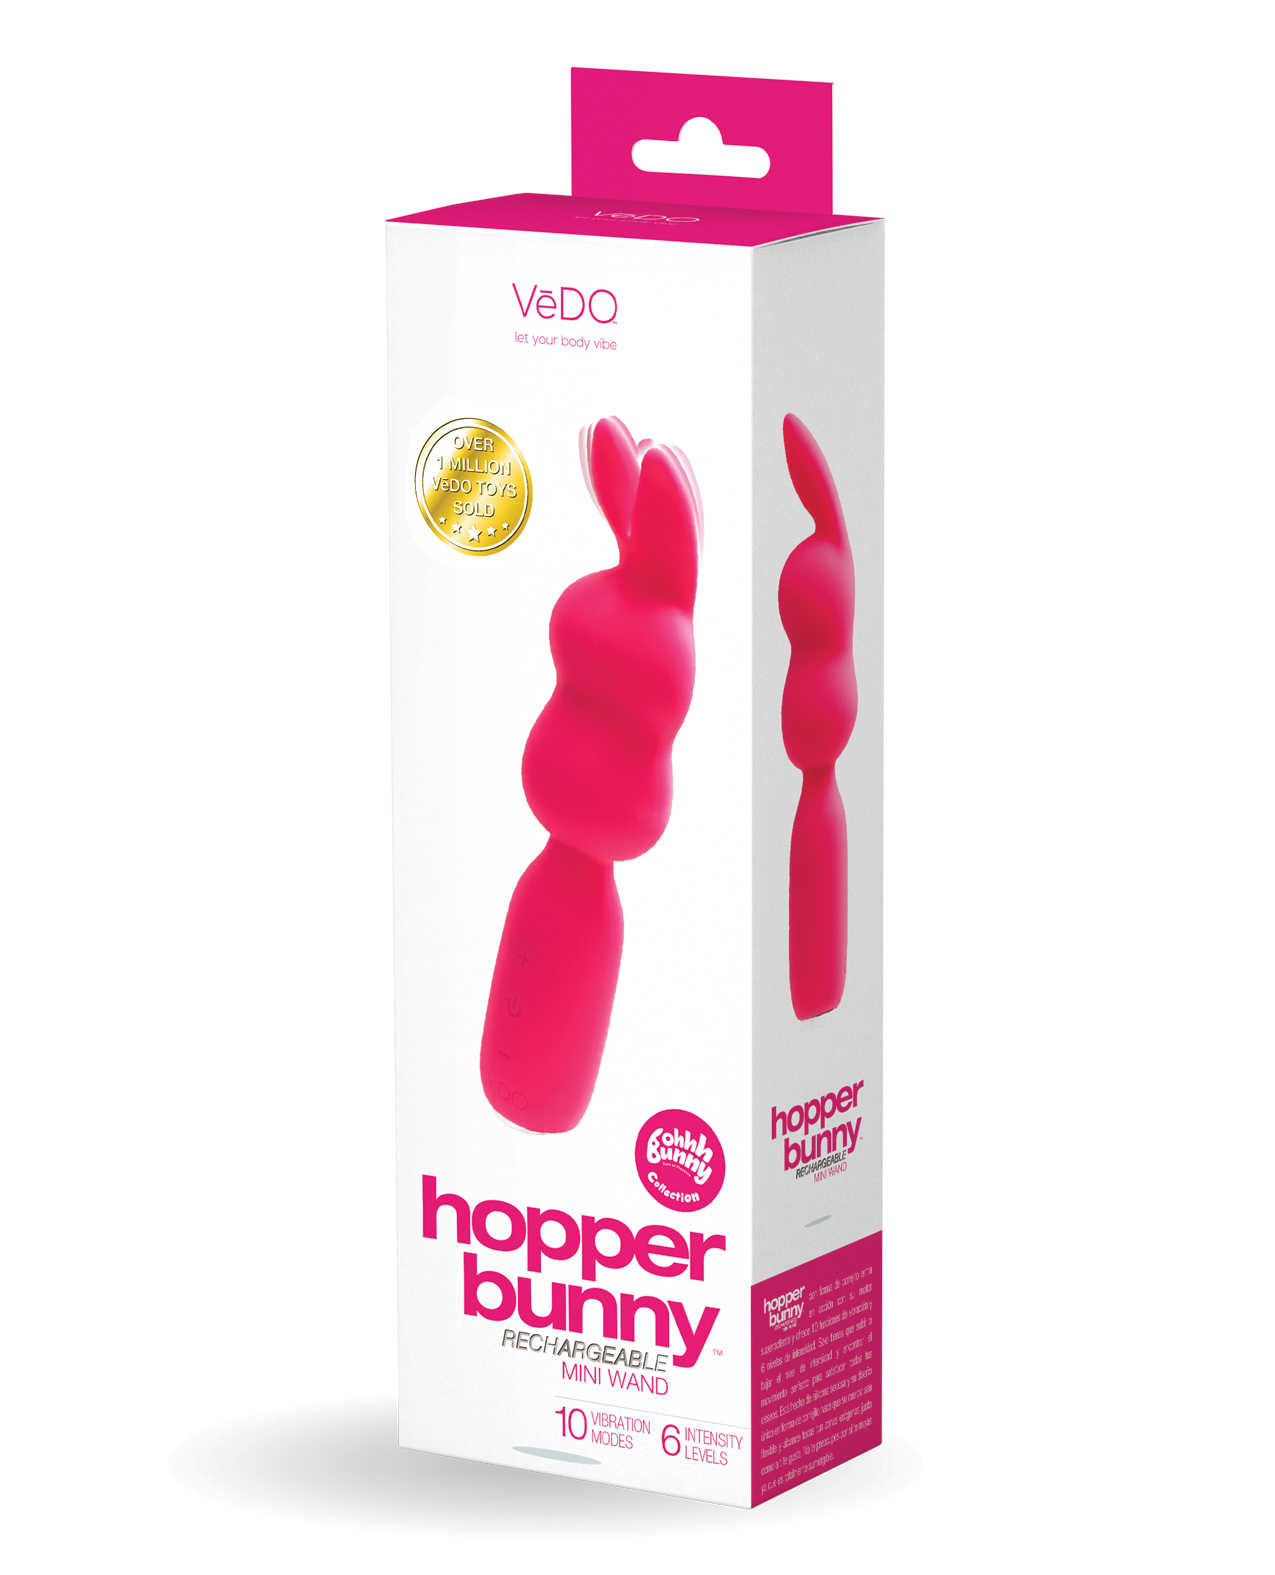 Pink bunny shape vibrator with a flexible body on a white box